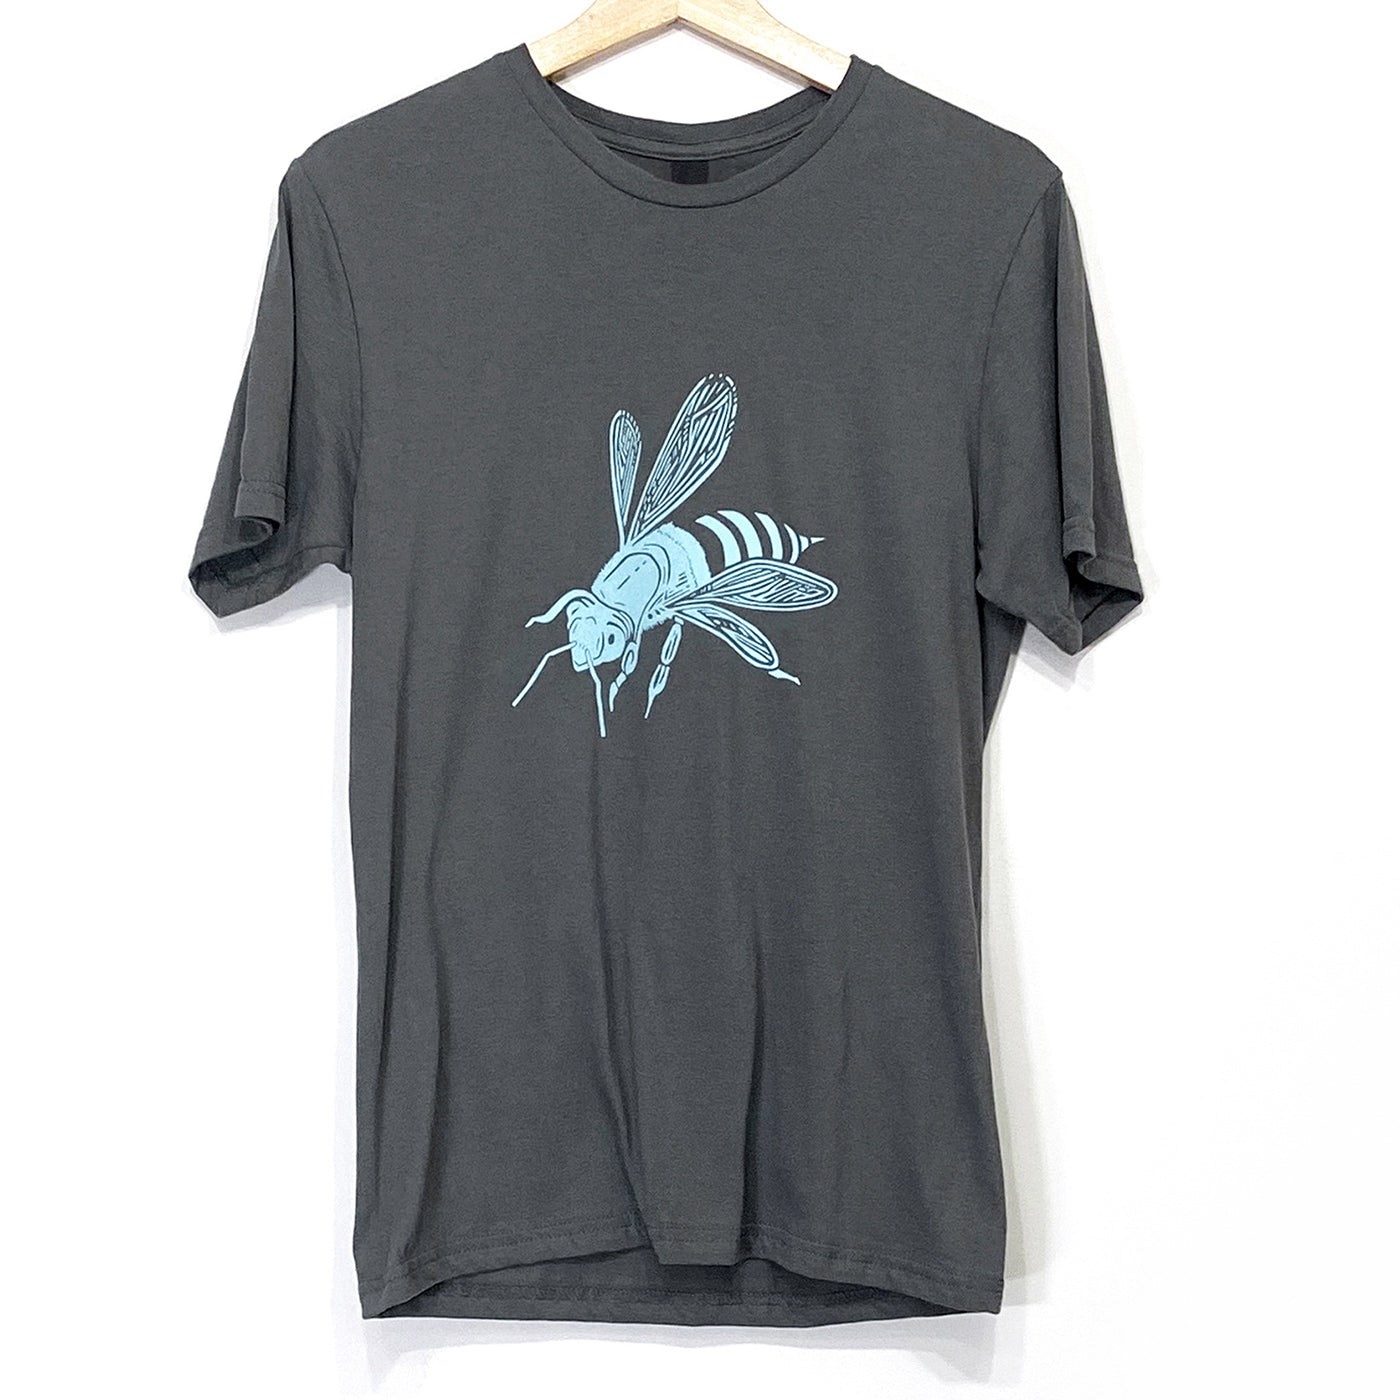 Short sleeved crew necked cotton tee in grey with a light blue bee silkscreen design